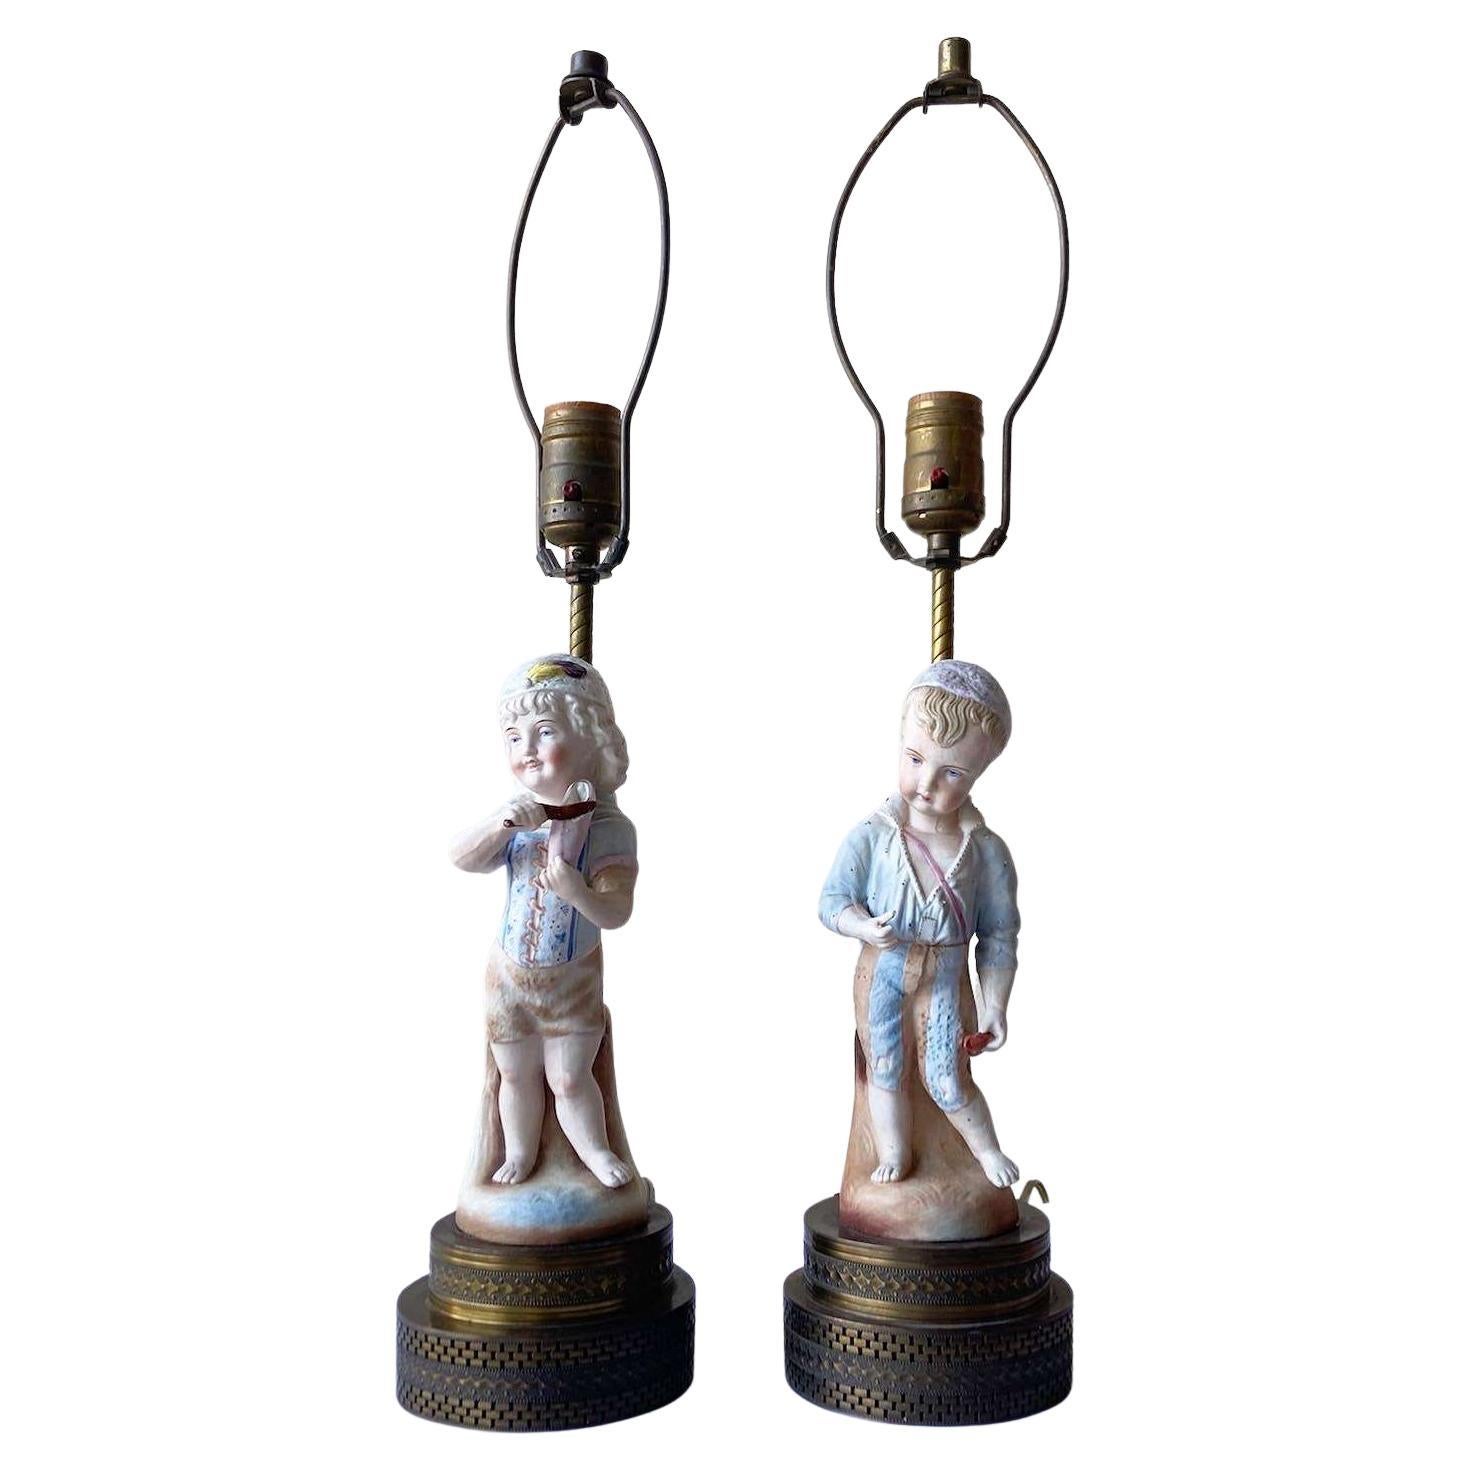 Vintage Boy and Girl Figurine Table Lamps For Sale